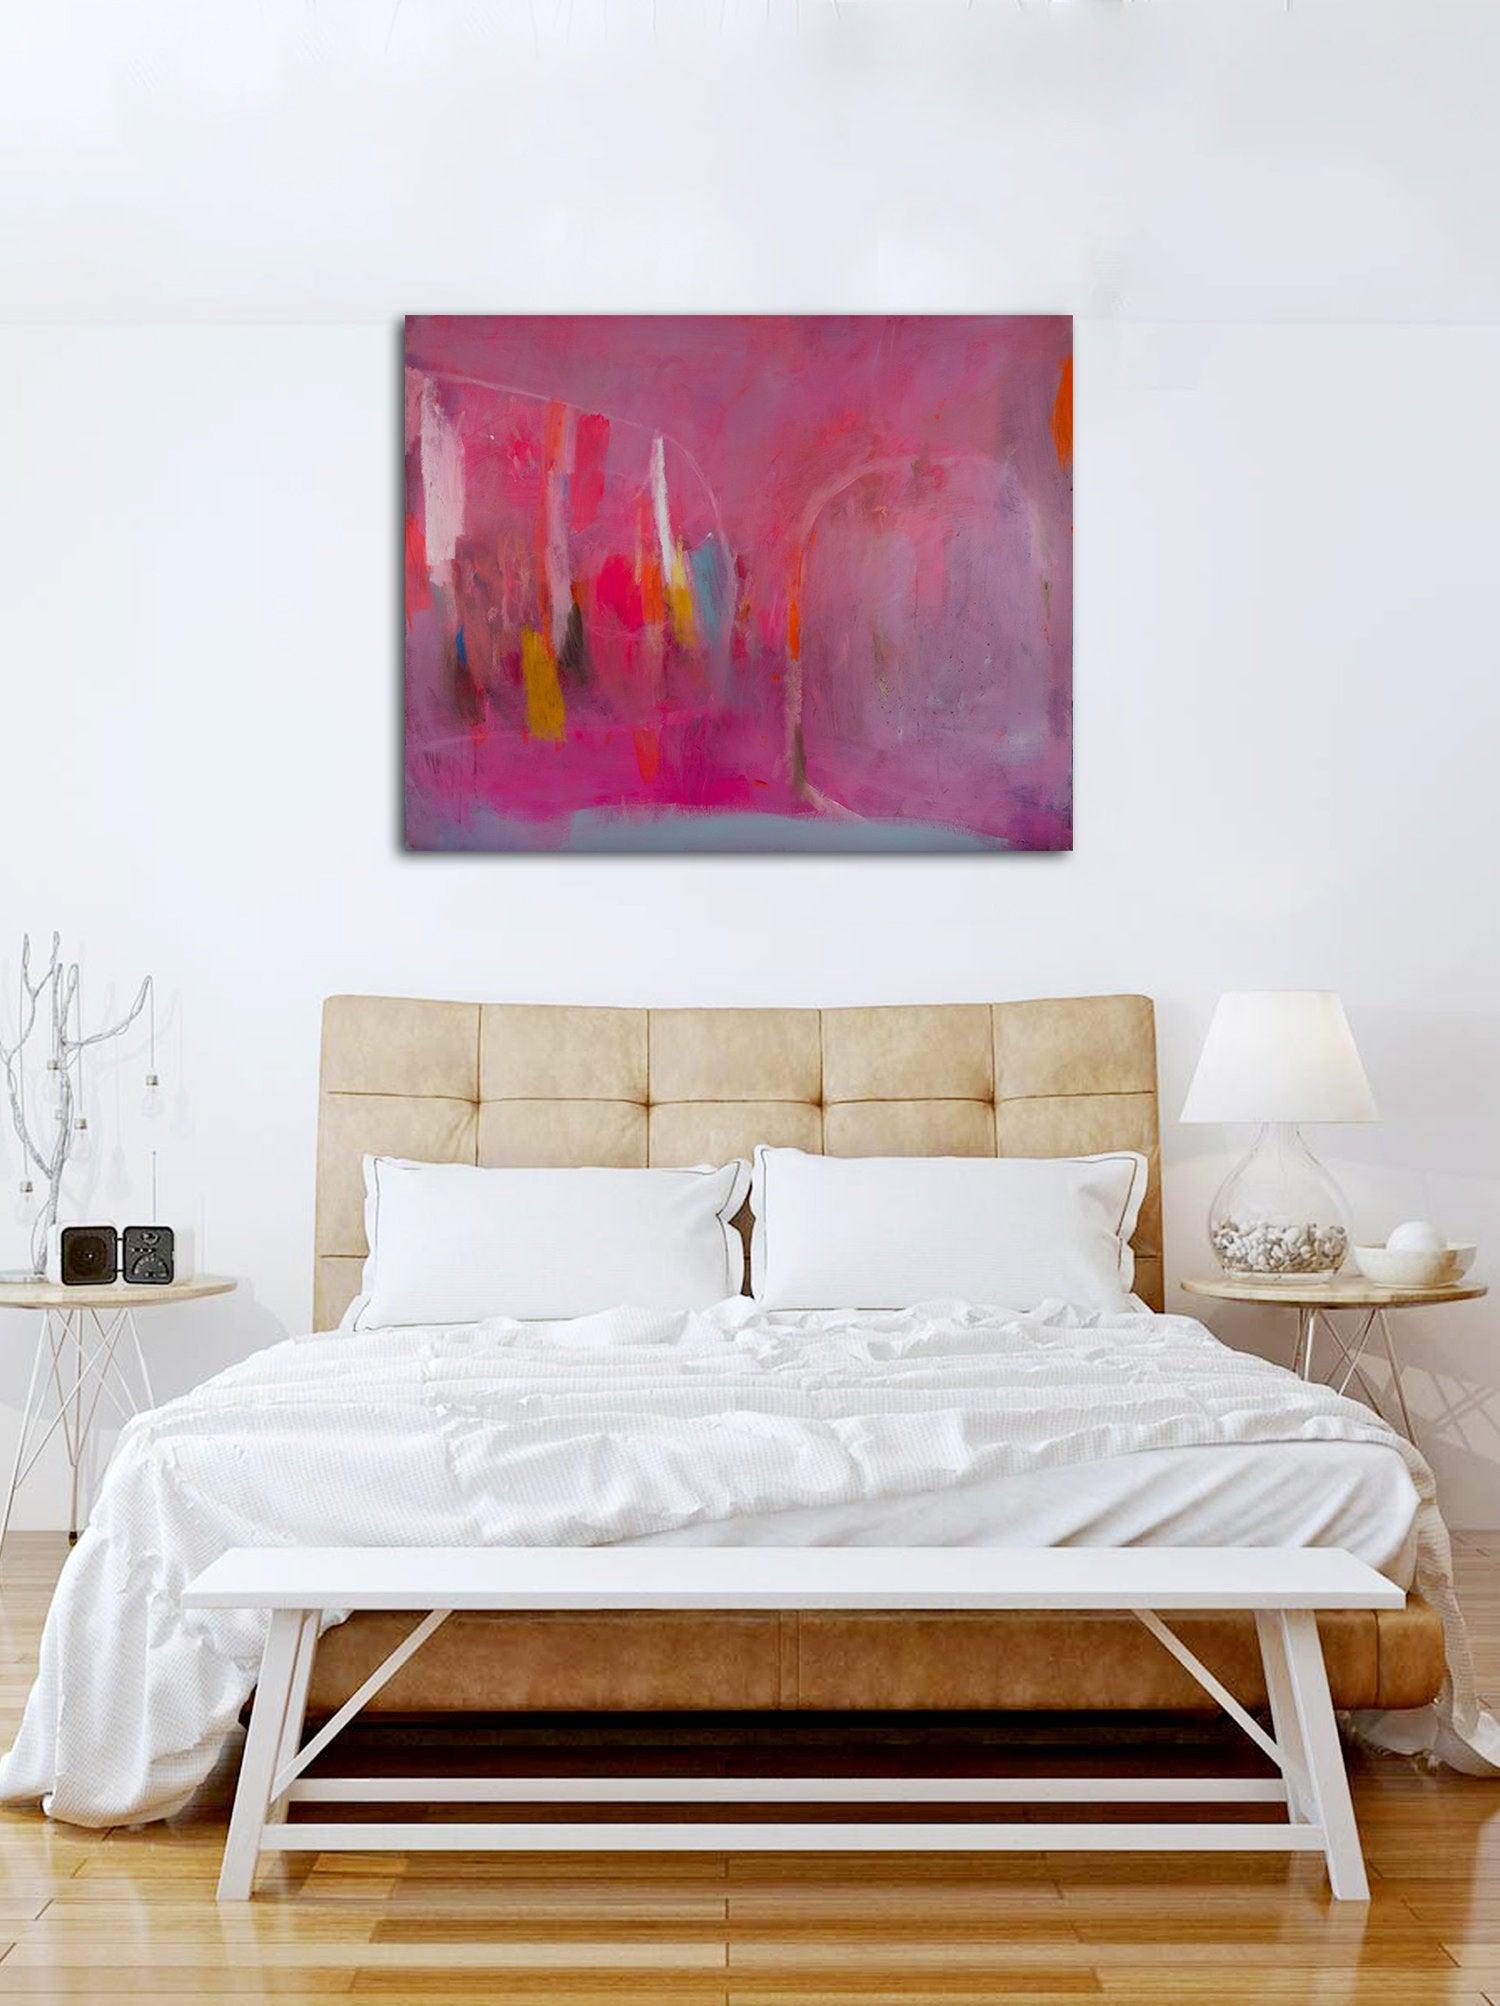 Red abstract painting, red abstract art, wall art decor, bedroom wall decor Colorful Painting White Abstract Painting red Abstract - camilomattis.com